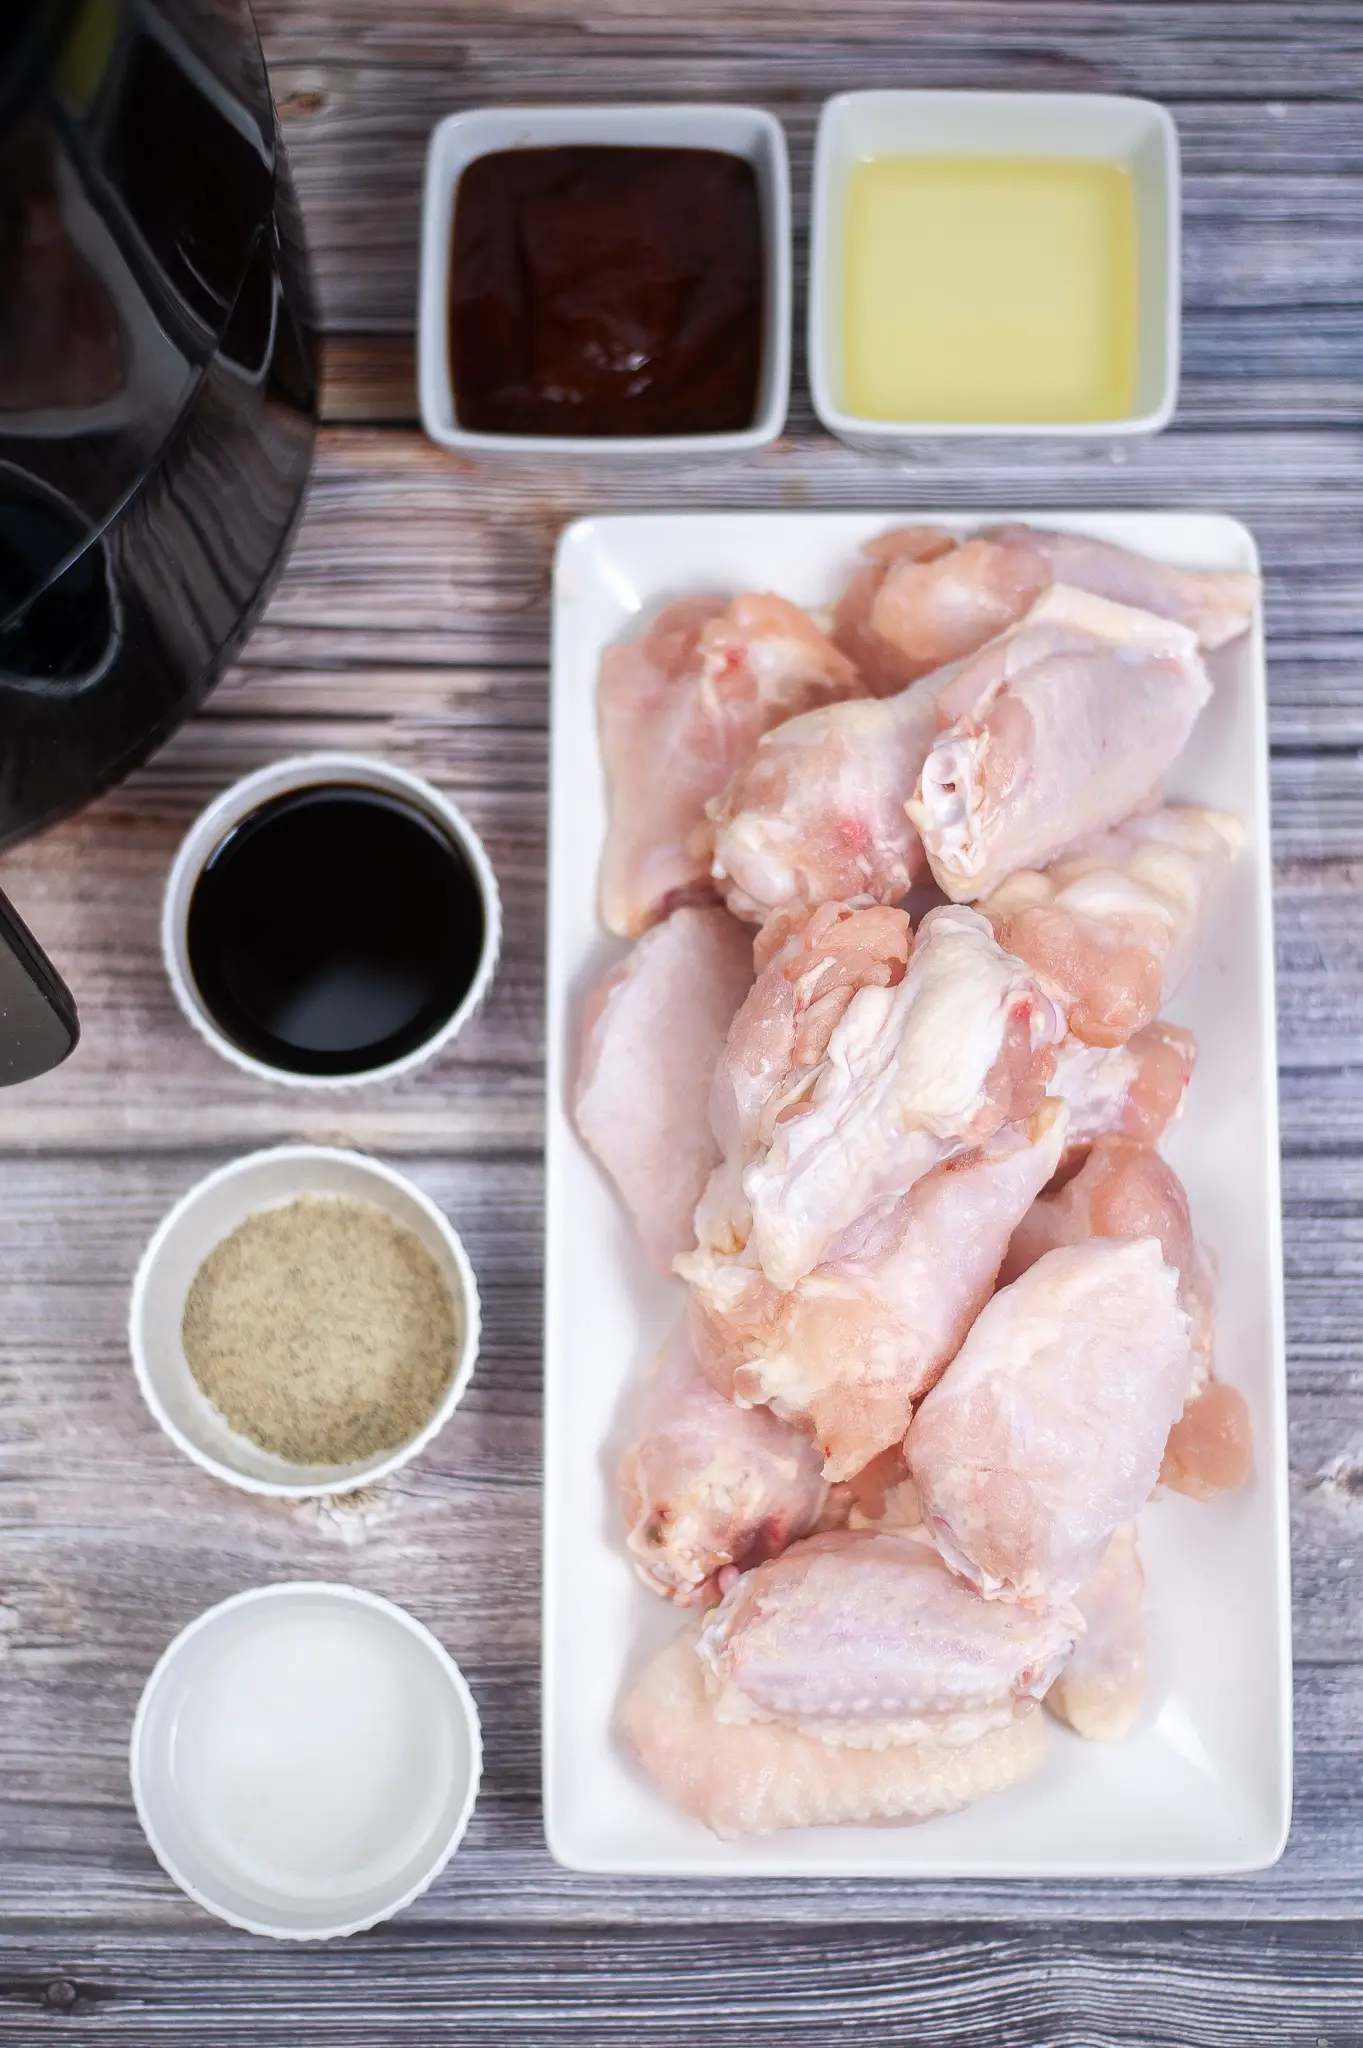 Ingredients for BBQ chicken wings